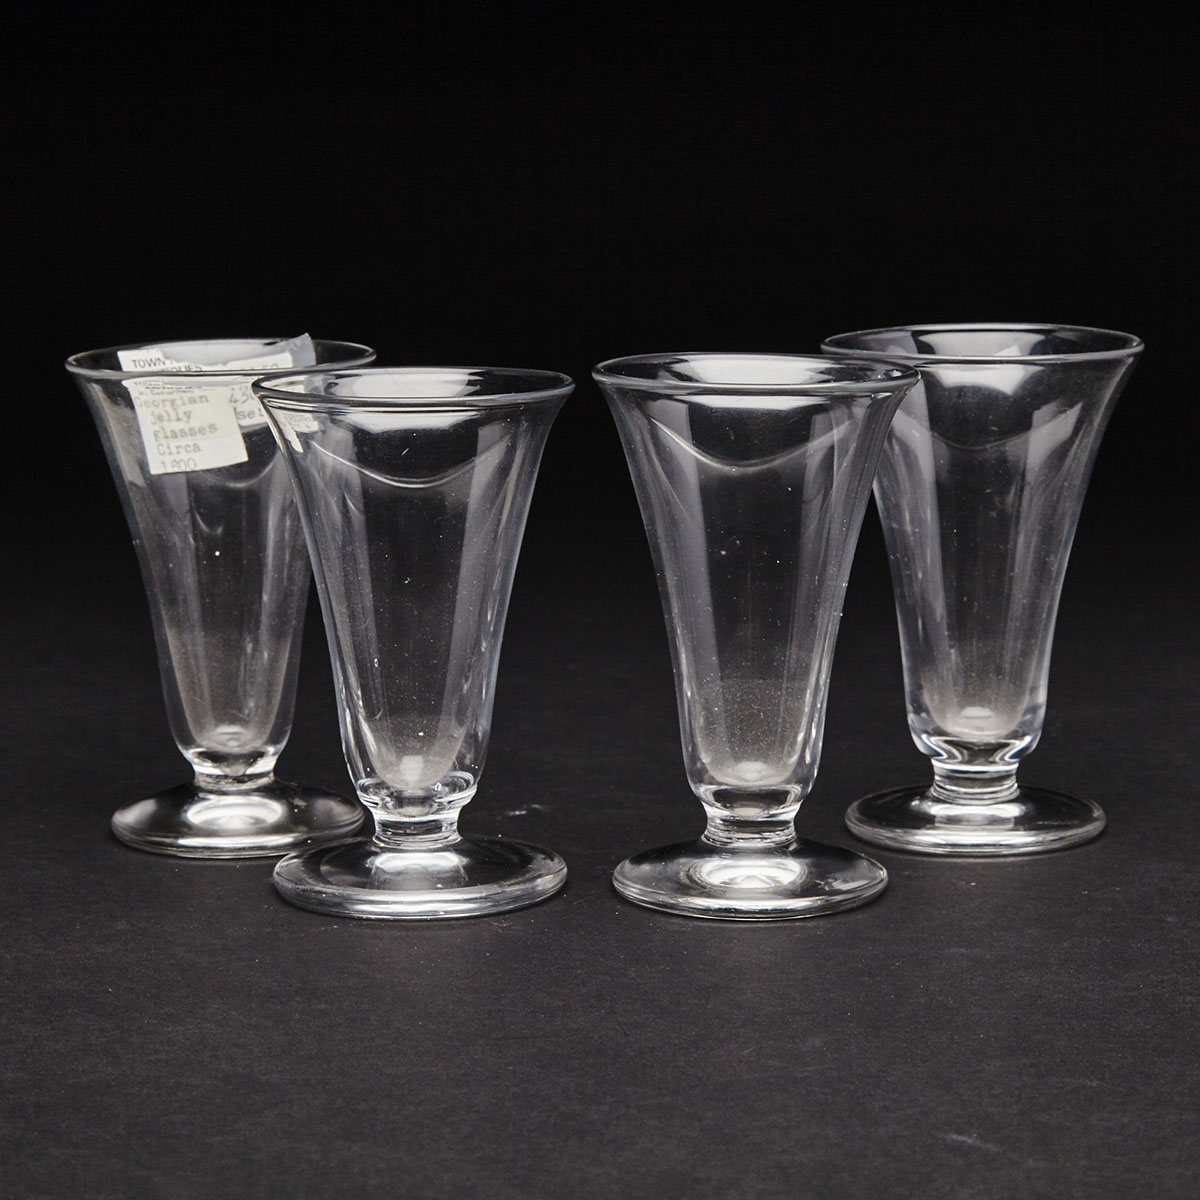 Four English Jelly Glasses, early 19th century